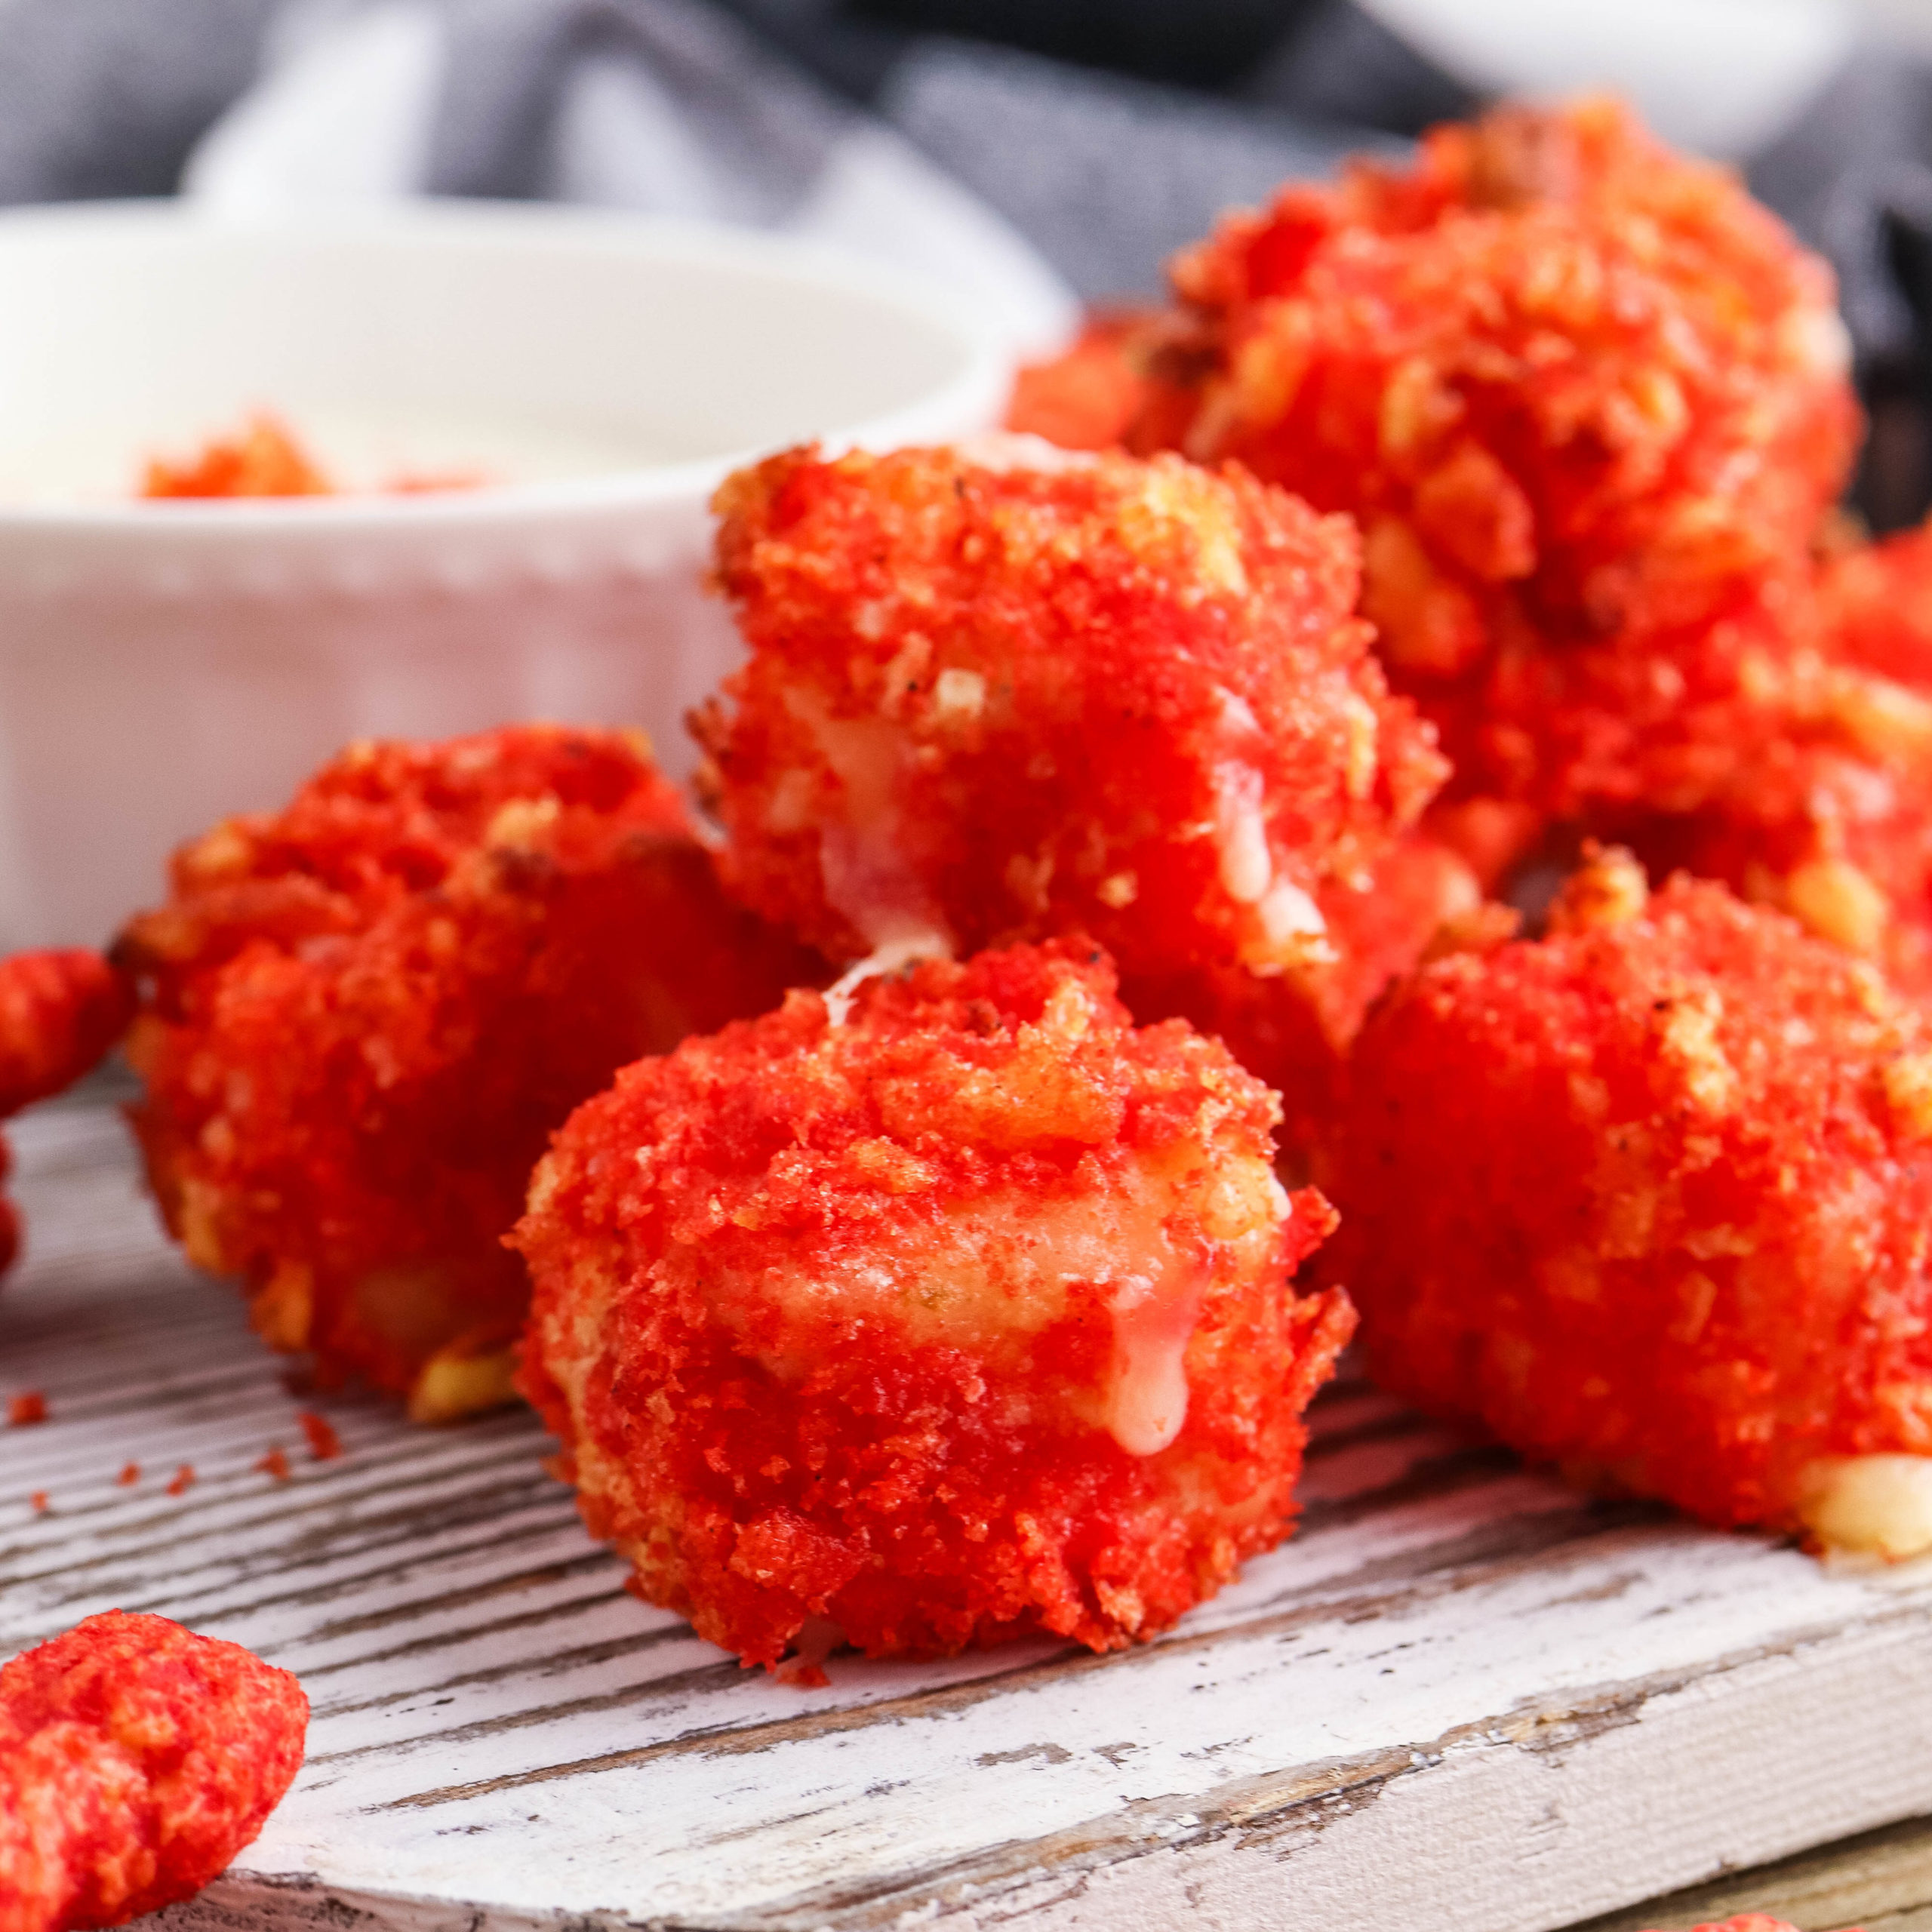 Flamin hot cheetos air fryer cheese bites after cooking.